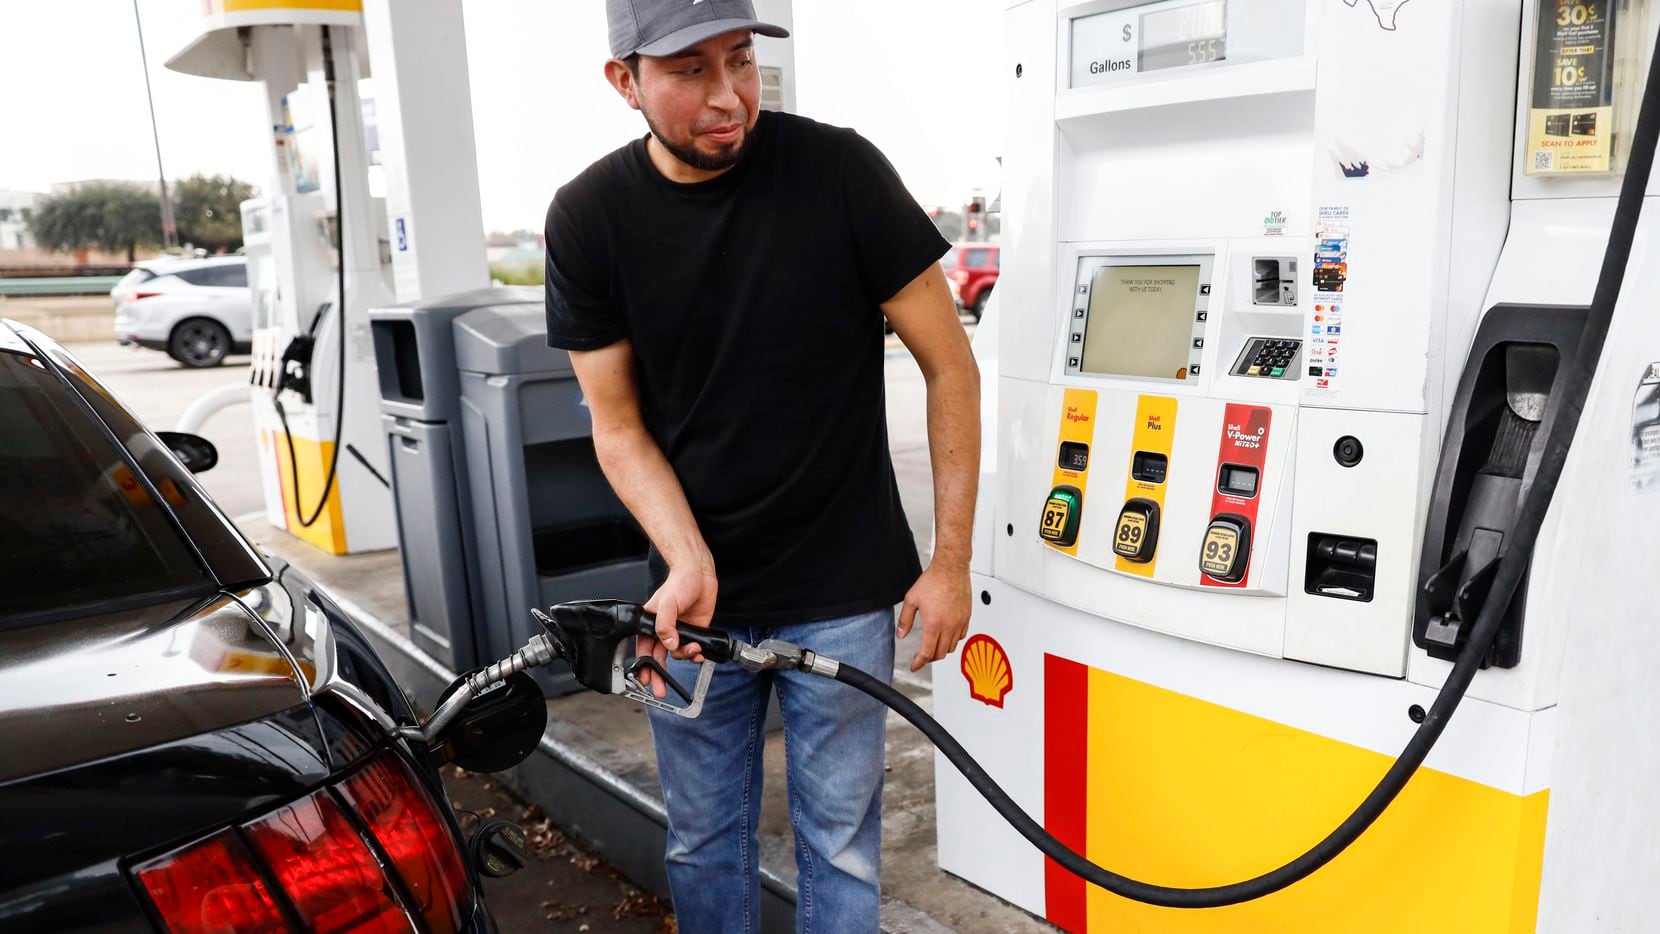 Arturo Hernandez pumps gasoline into his car at Shell on 4611 N US 75-Central Expy 1000 in...